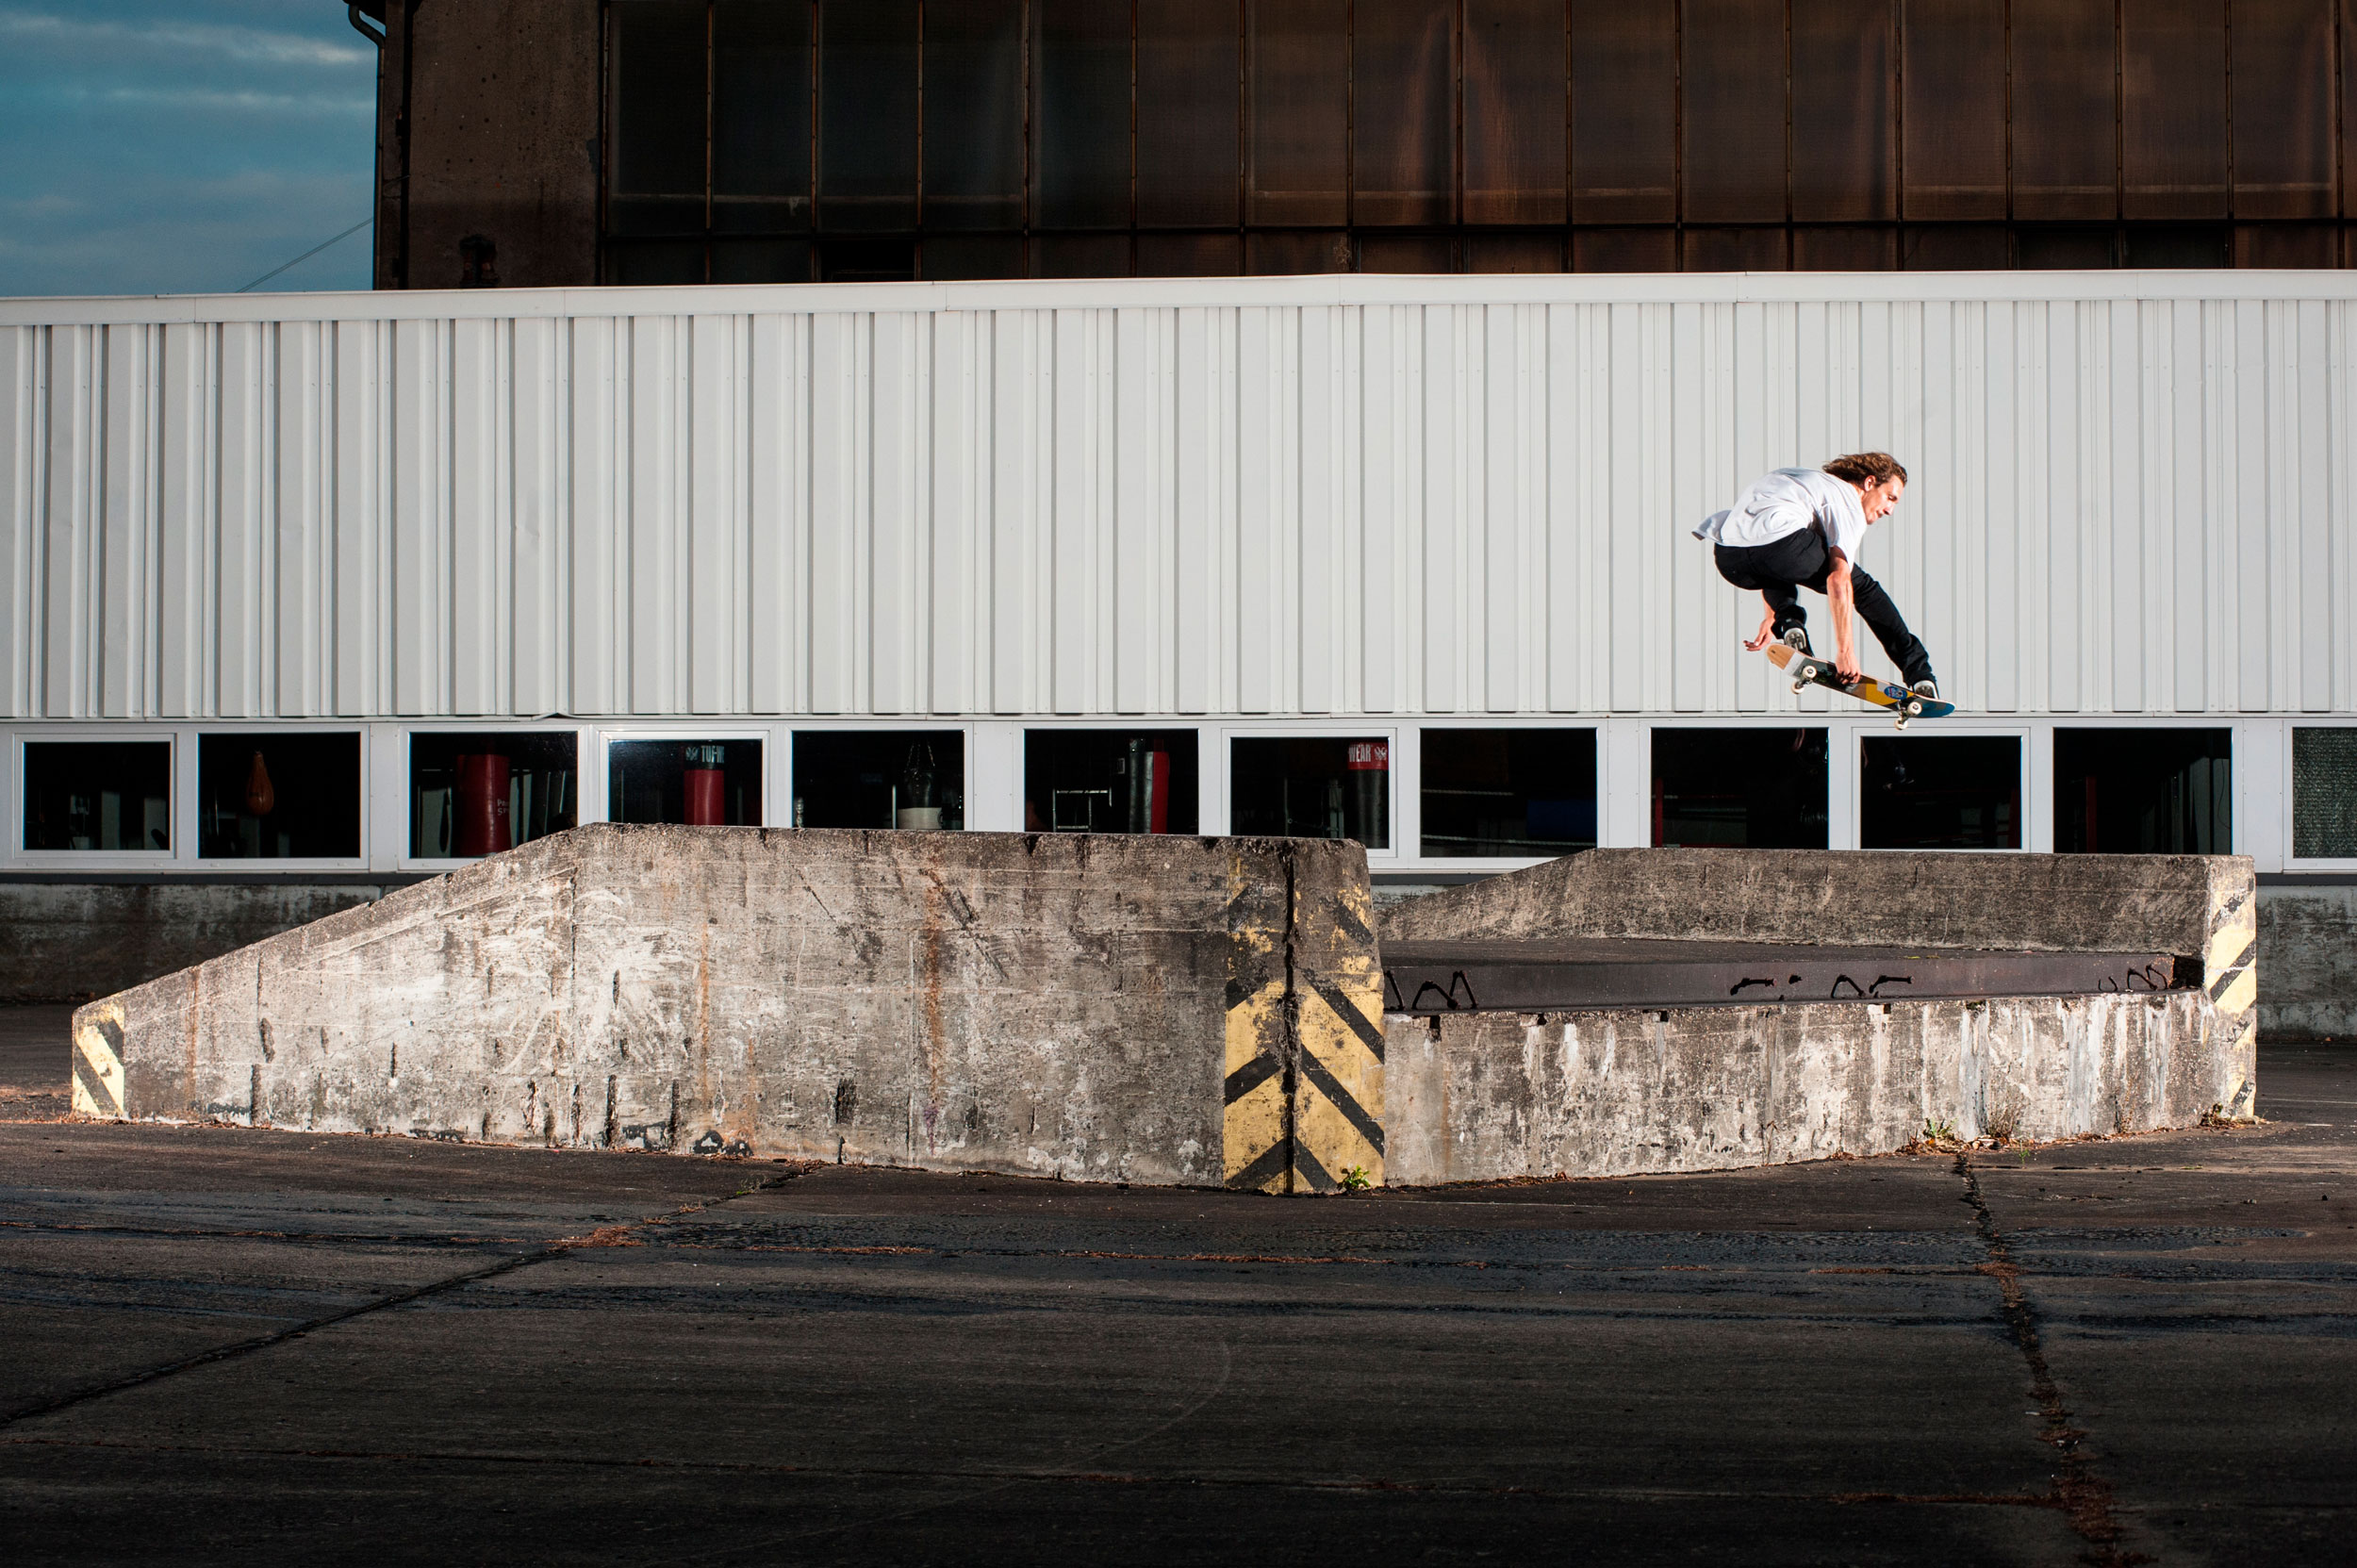 Mark Frolich, Melongrap, Hannover, Free Skatemag, by Nothers